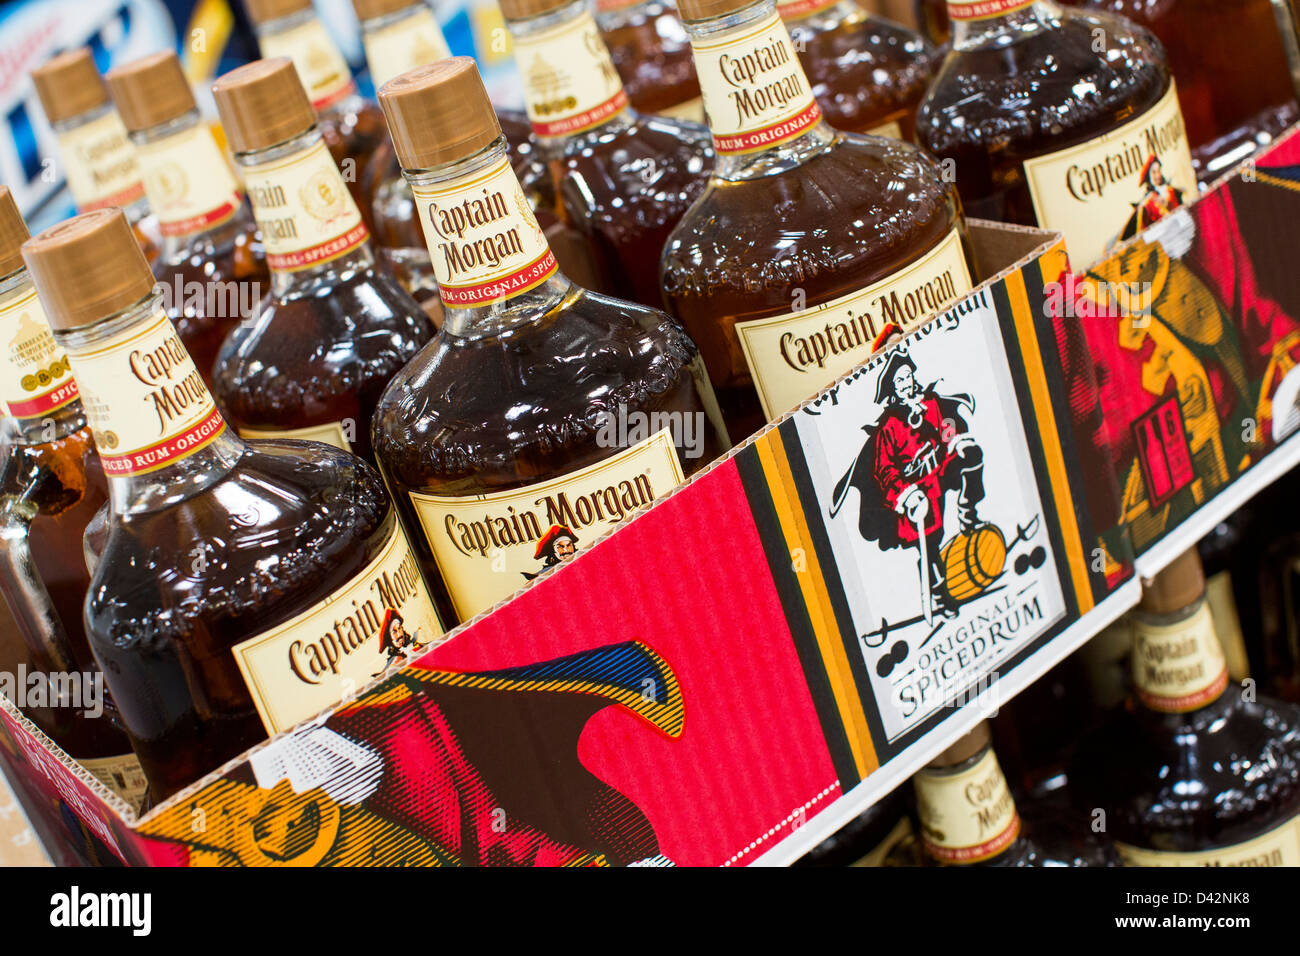 Captain Morgan High Resolution Stock Photography and Images - Alamy